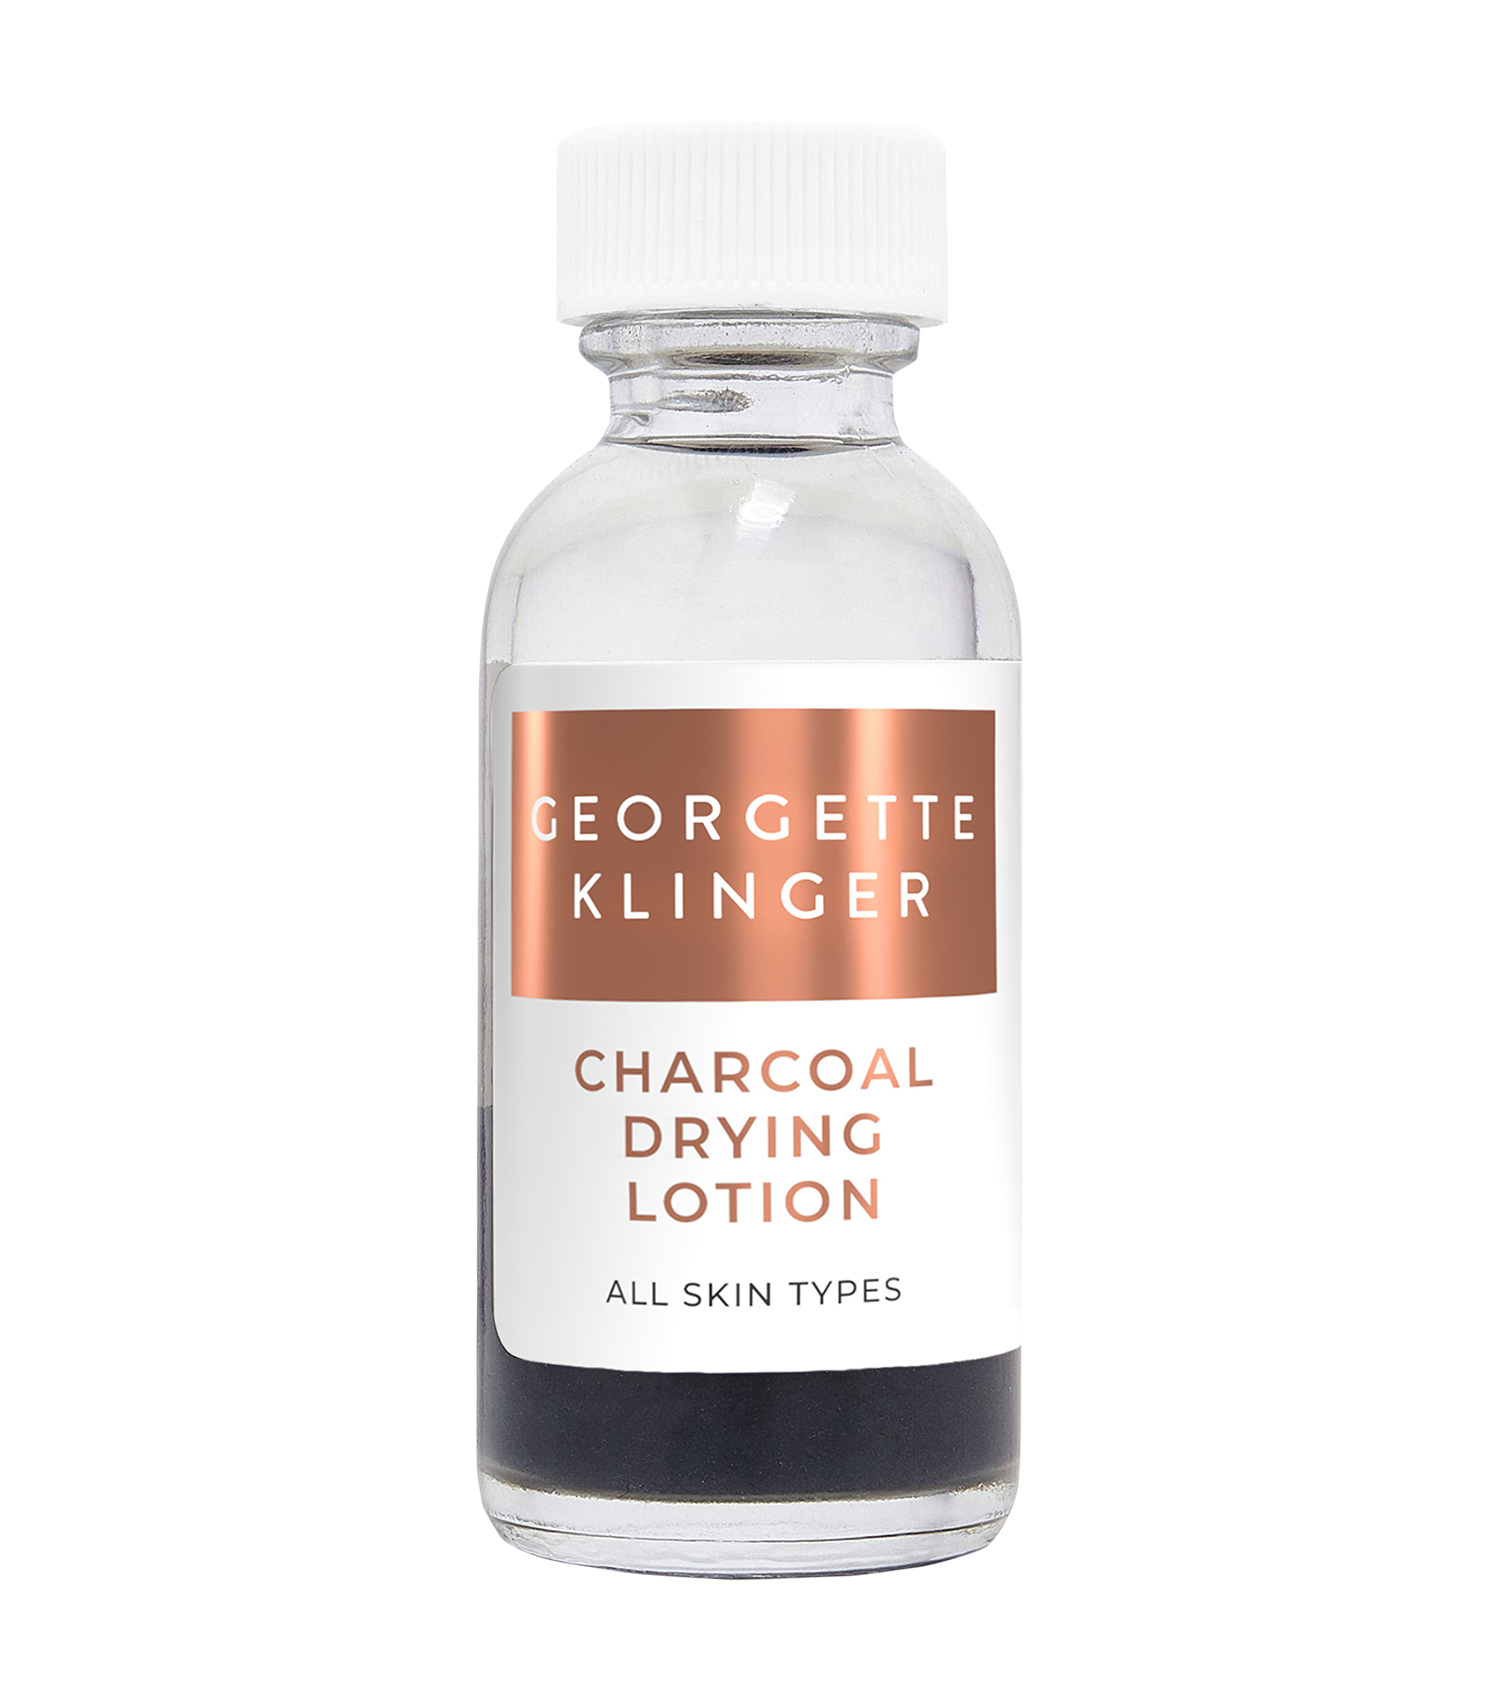 Charcoal Drying Lotion